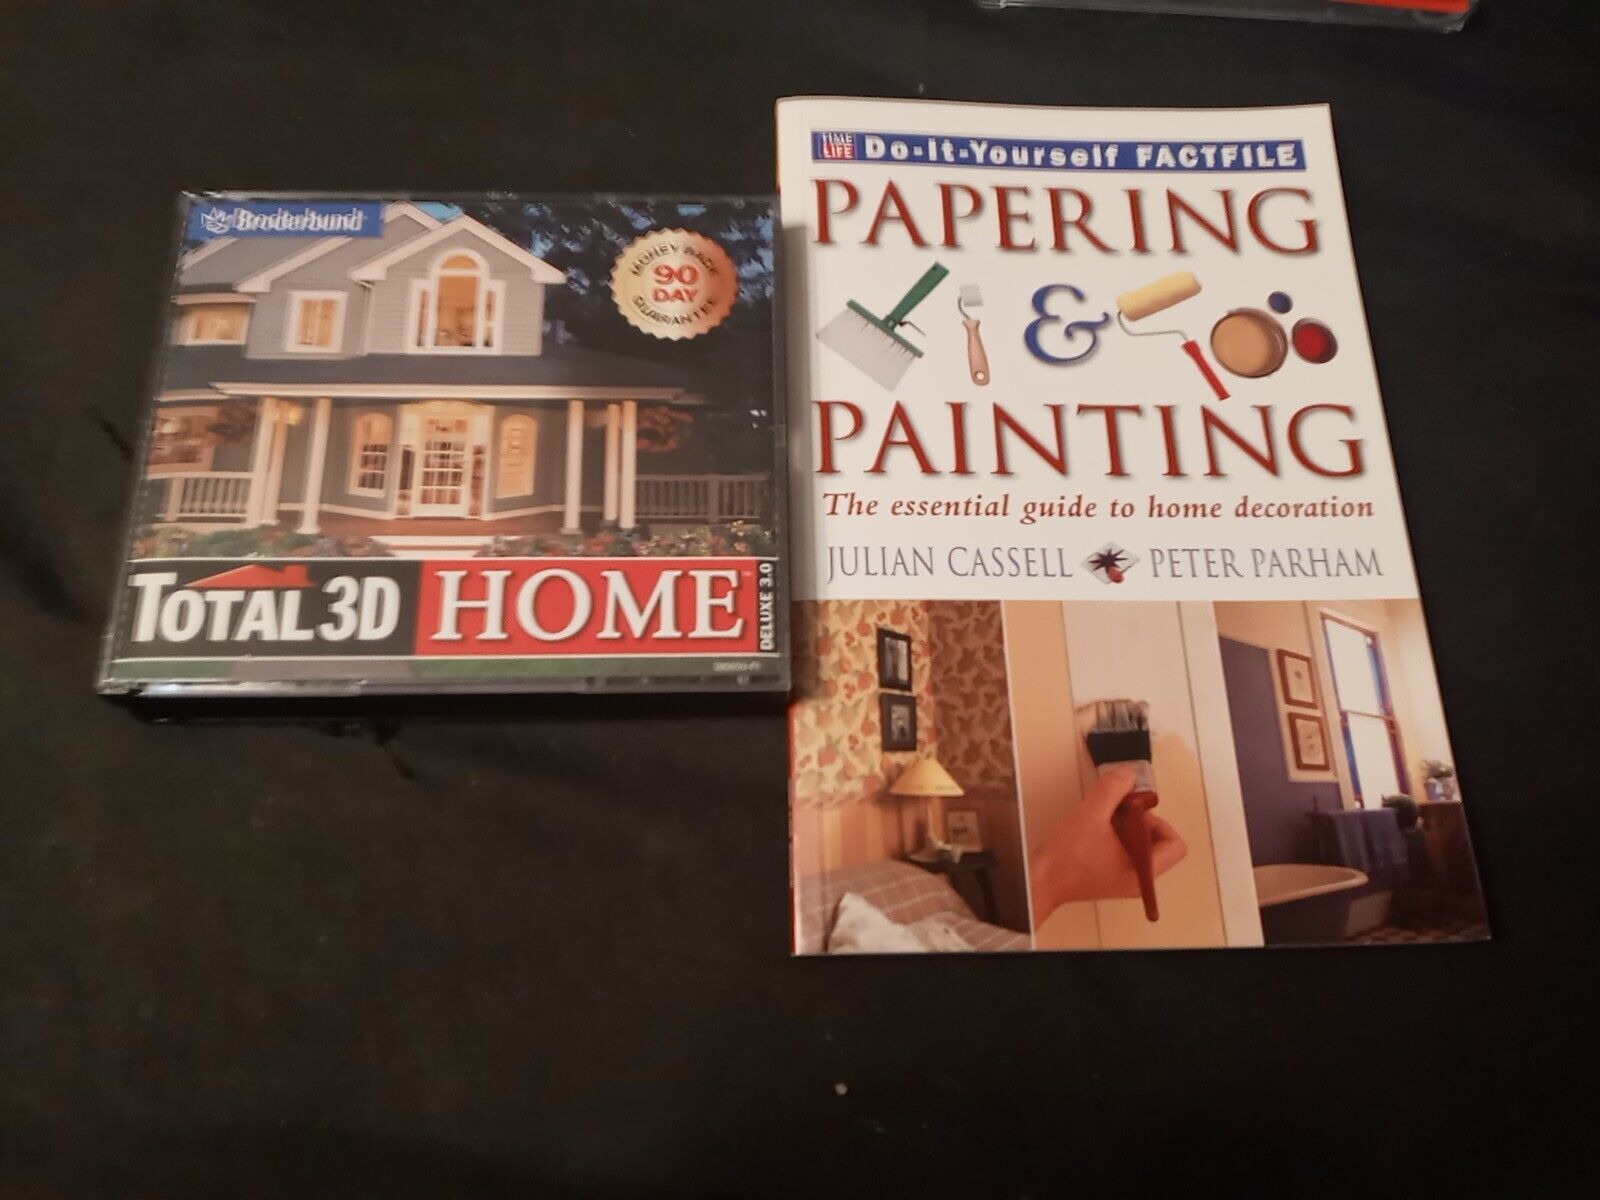 BRODERBUND TOTAL 3D HOME DELUXE 3 PC CD HOME DESIGN + PAPERING & PAINTING BOOK